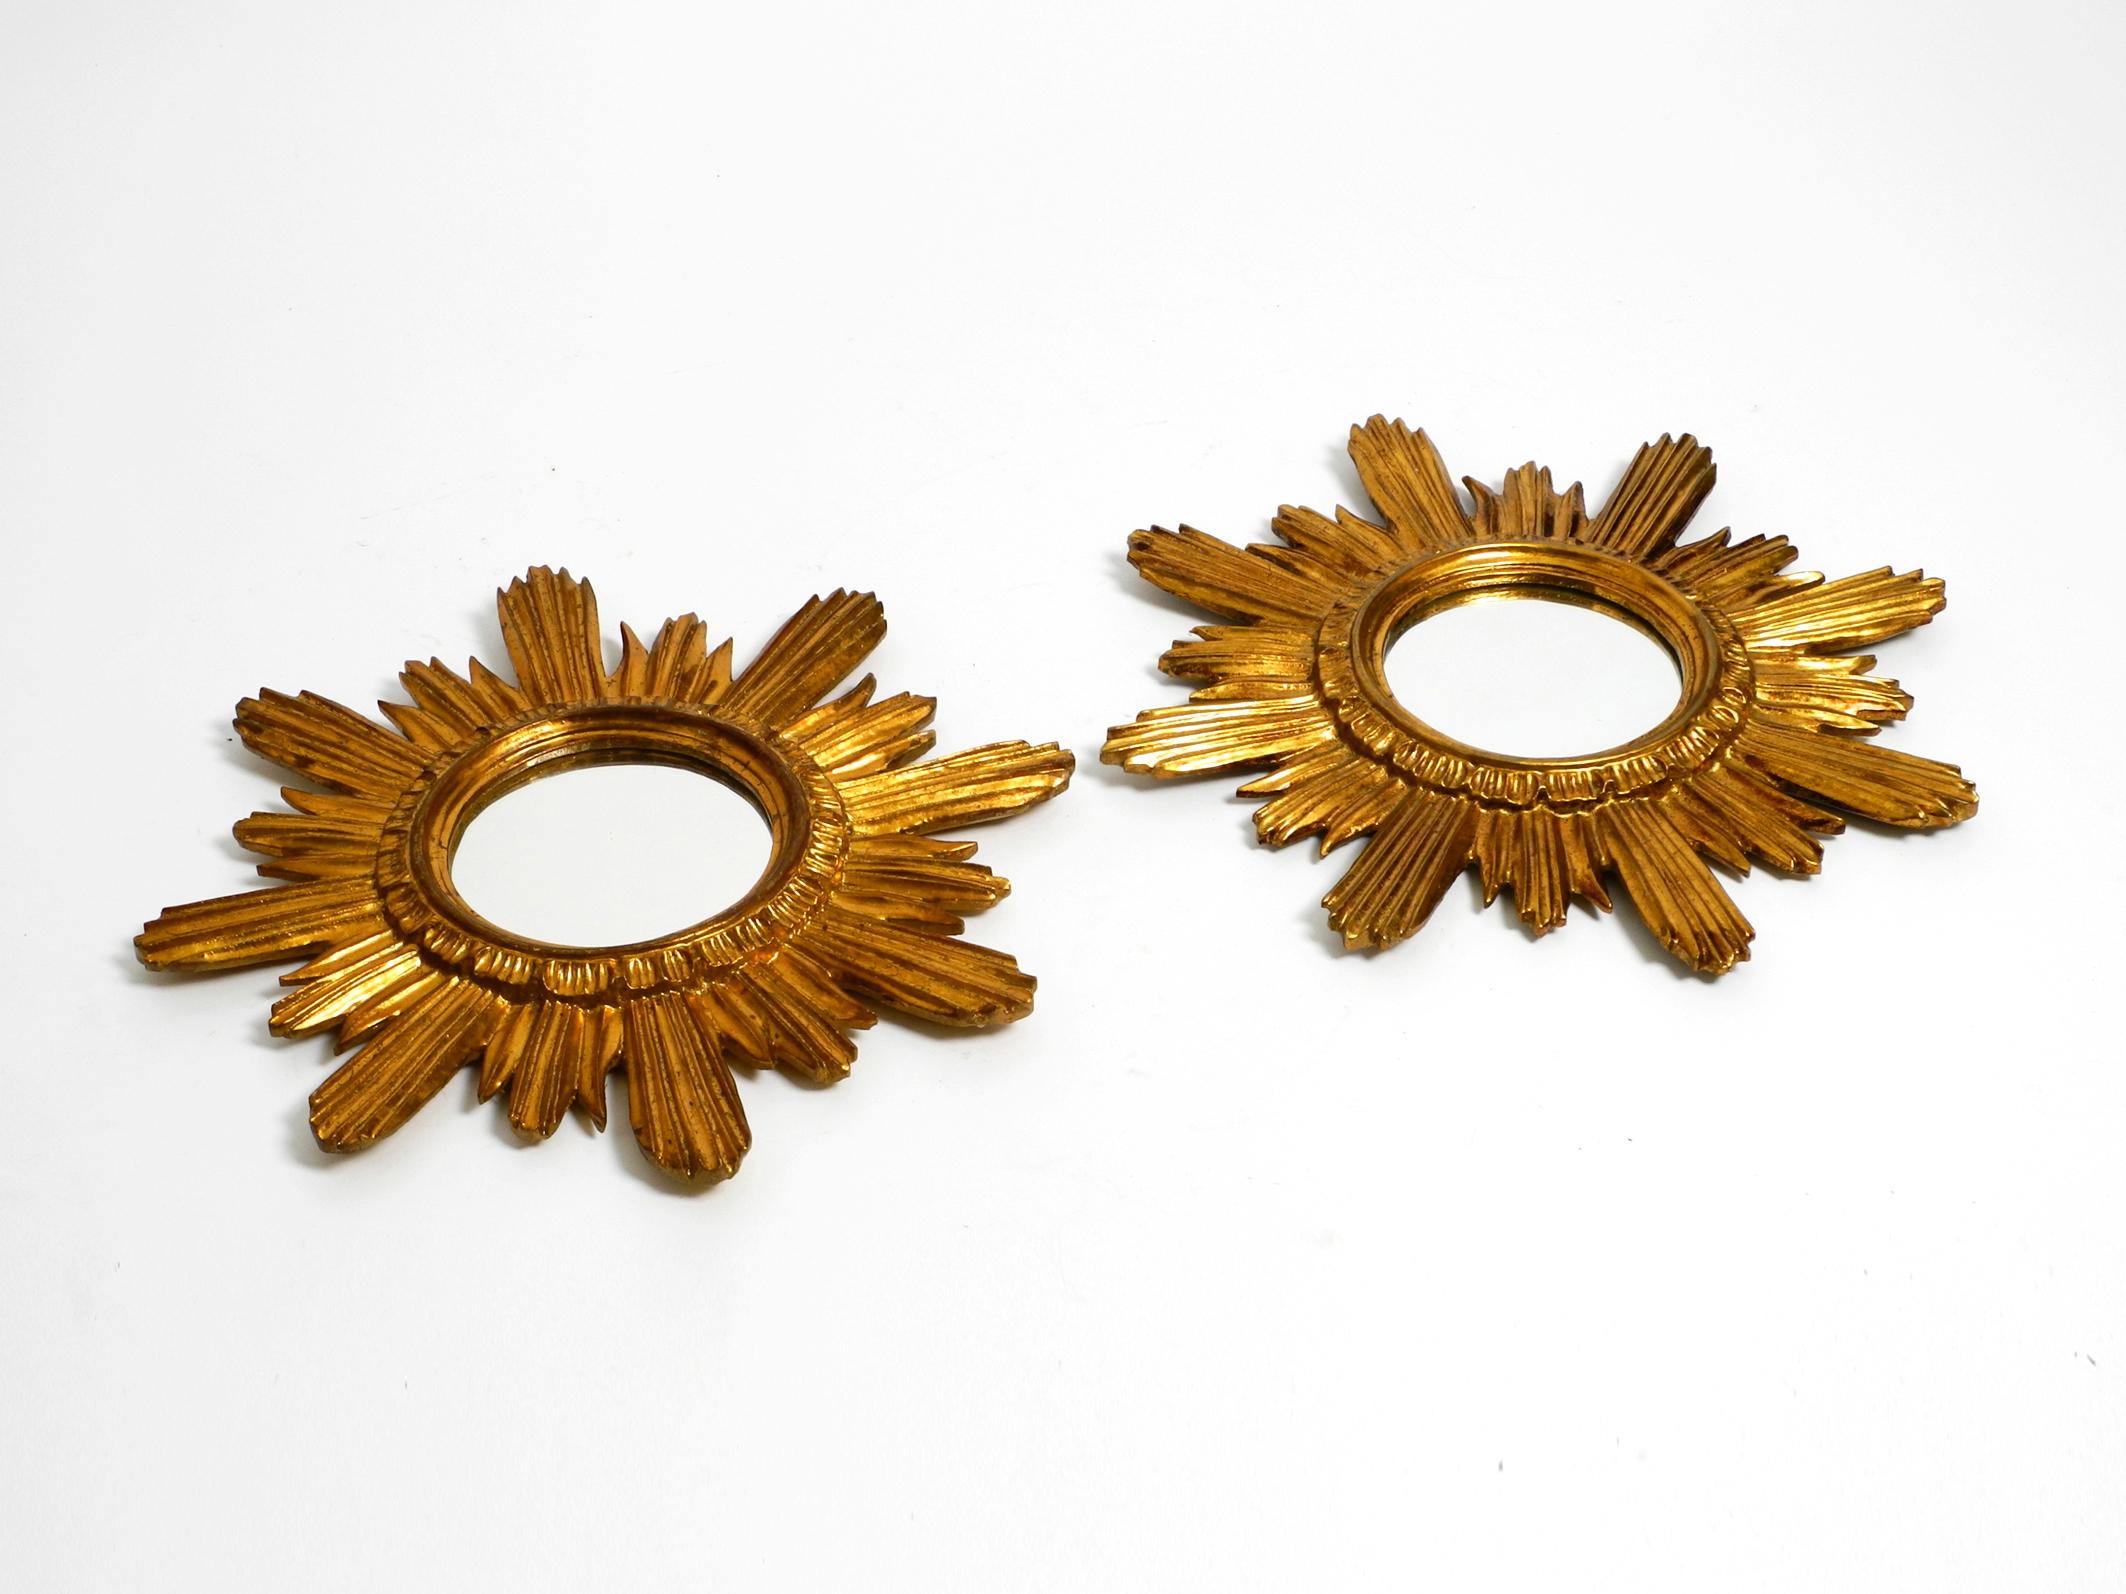 Pair of gold-plated mid-century sunburst wall mirrors made of wood and resin 11